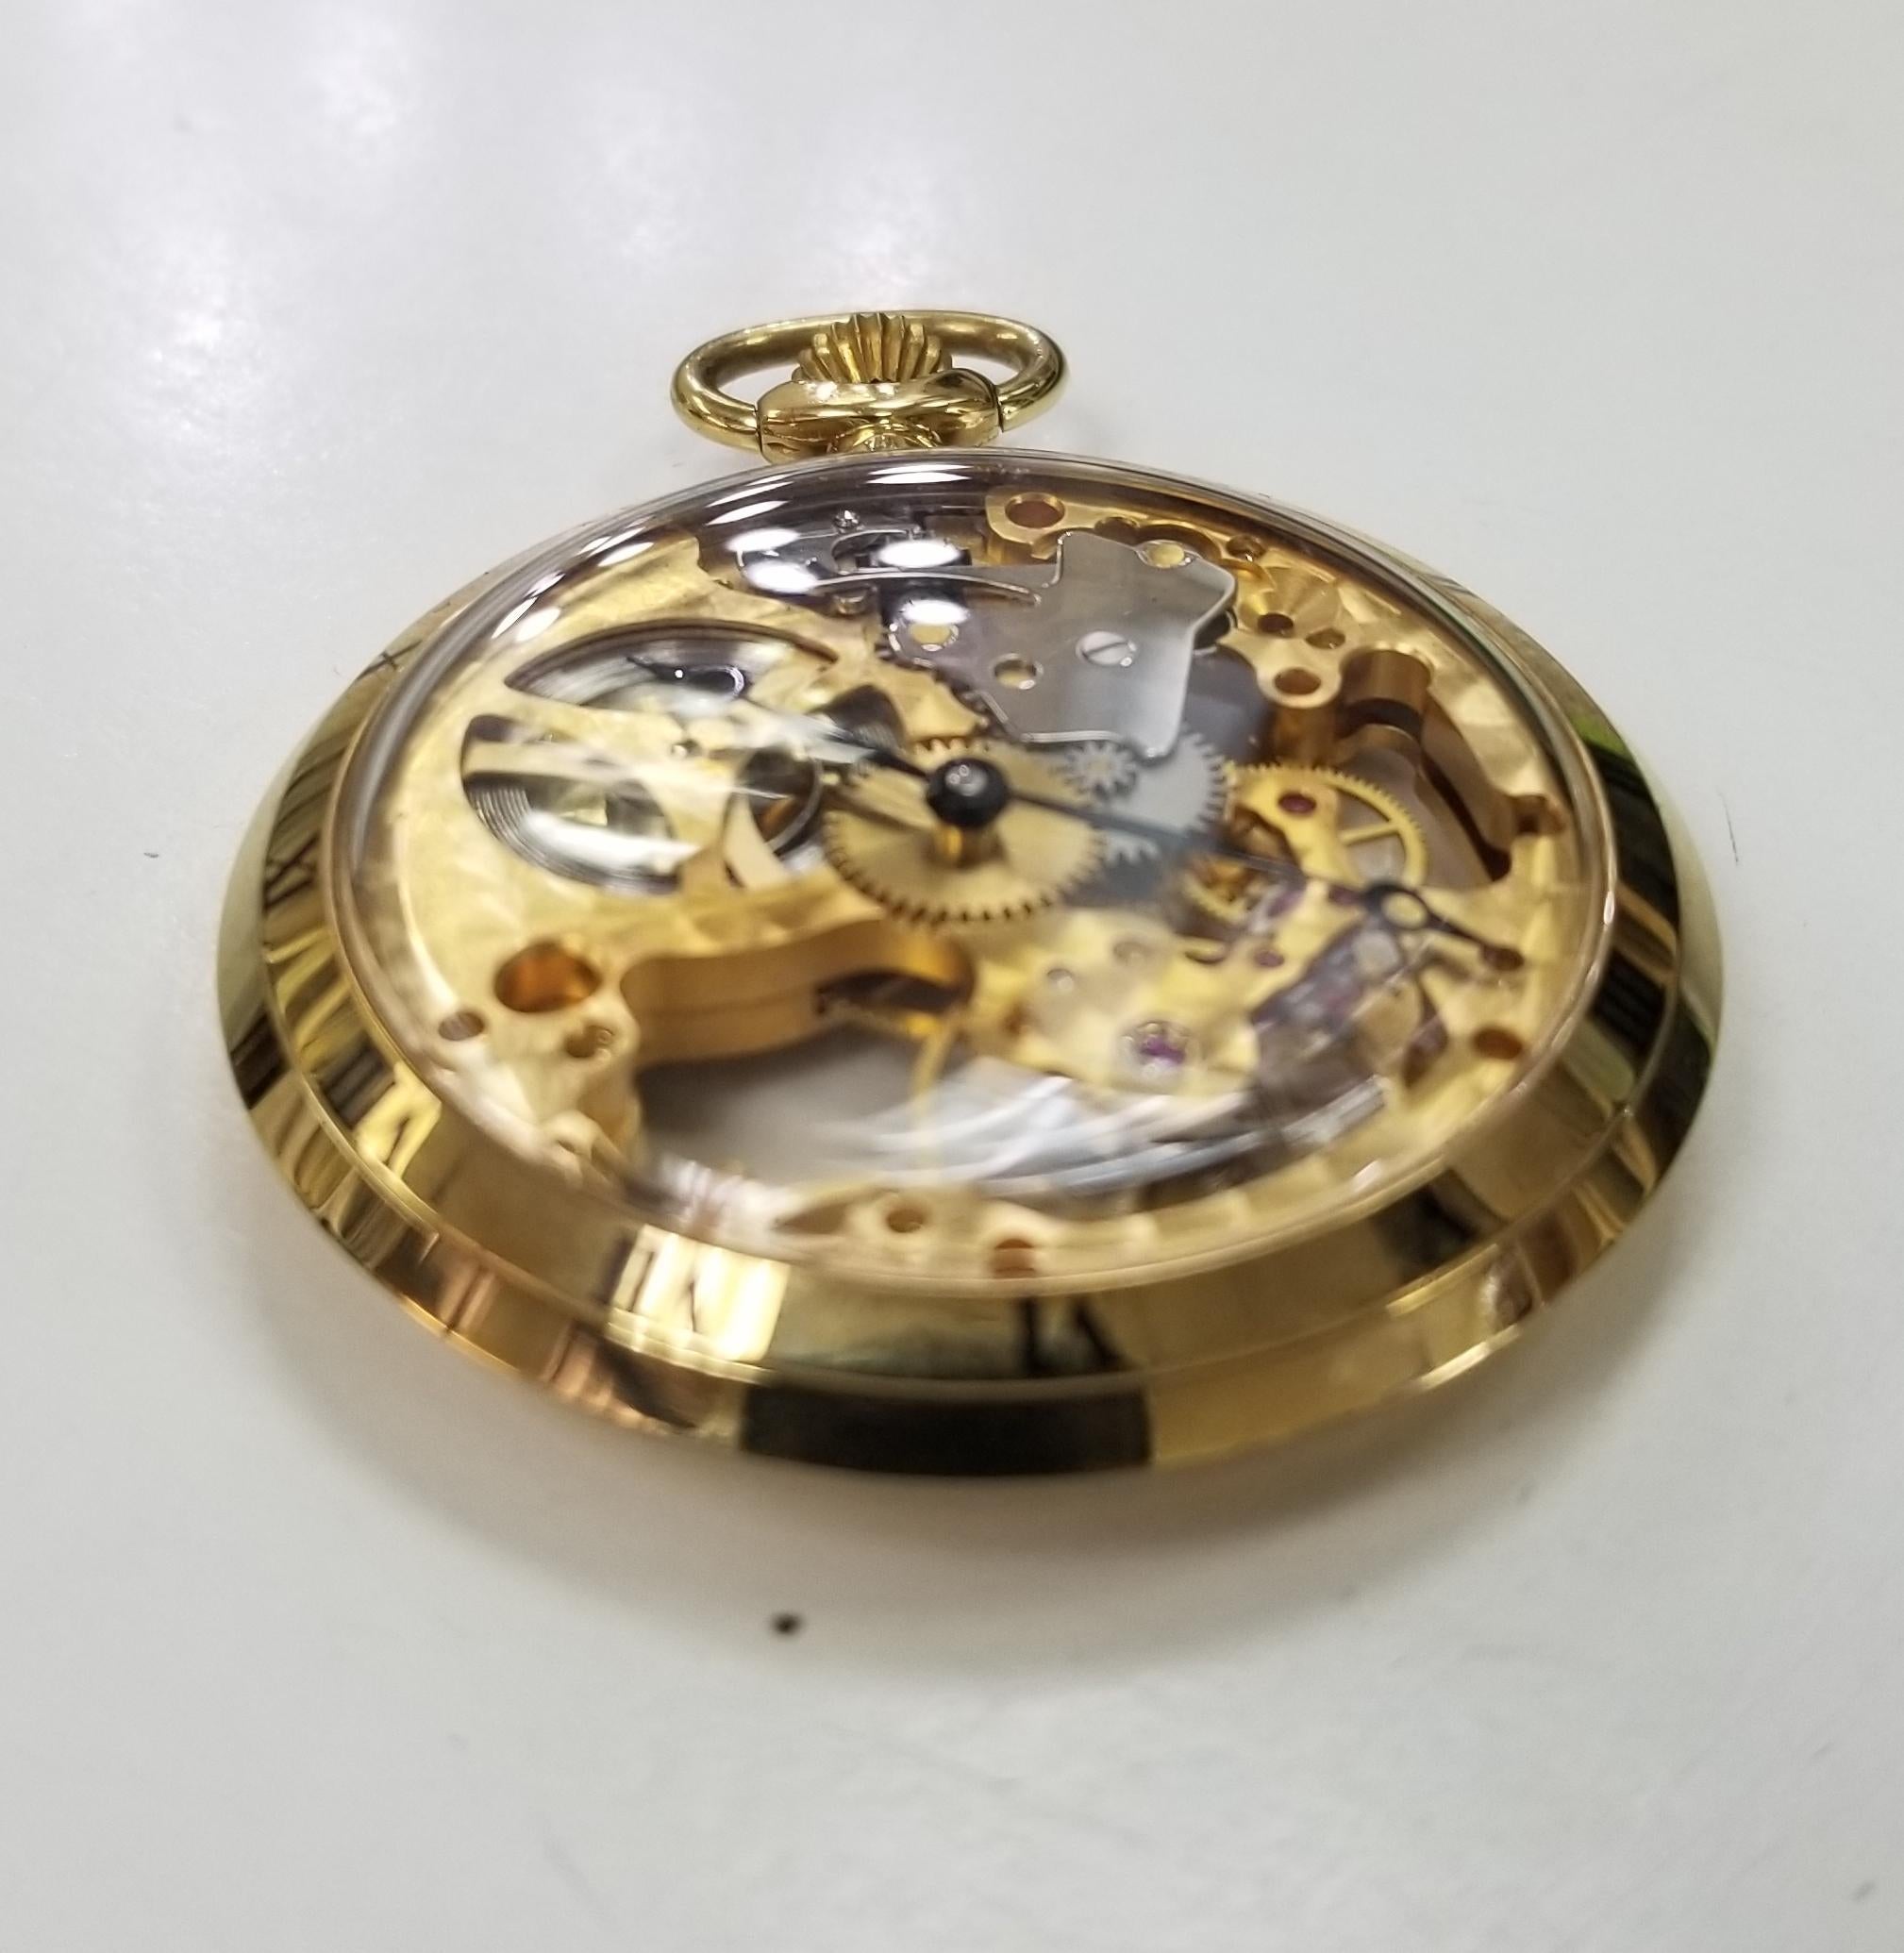 Colibri 17 Jewel Swiss Incabloc Skeleton Pocket Watch excellent . This is a beautiful timepiece that keeps great time.Never used . 